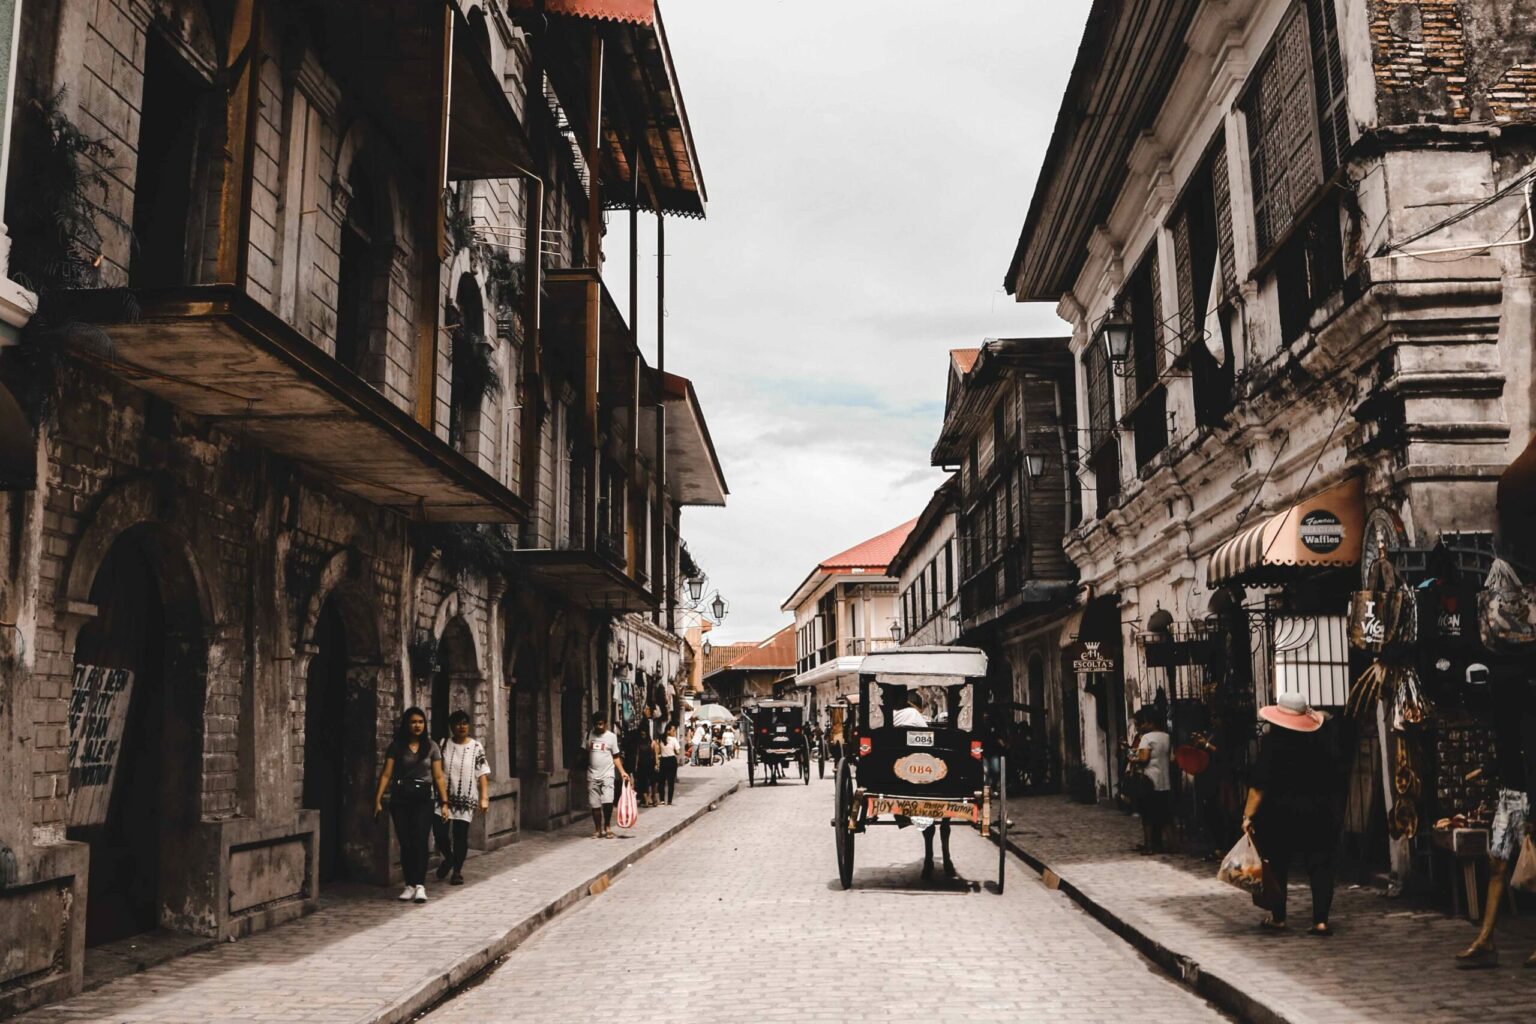 Ilocos Sur Vigan City Heritage & Sightseeing Tour with Horse-Drawn Carriage Ride & Transfers